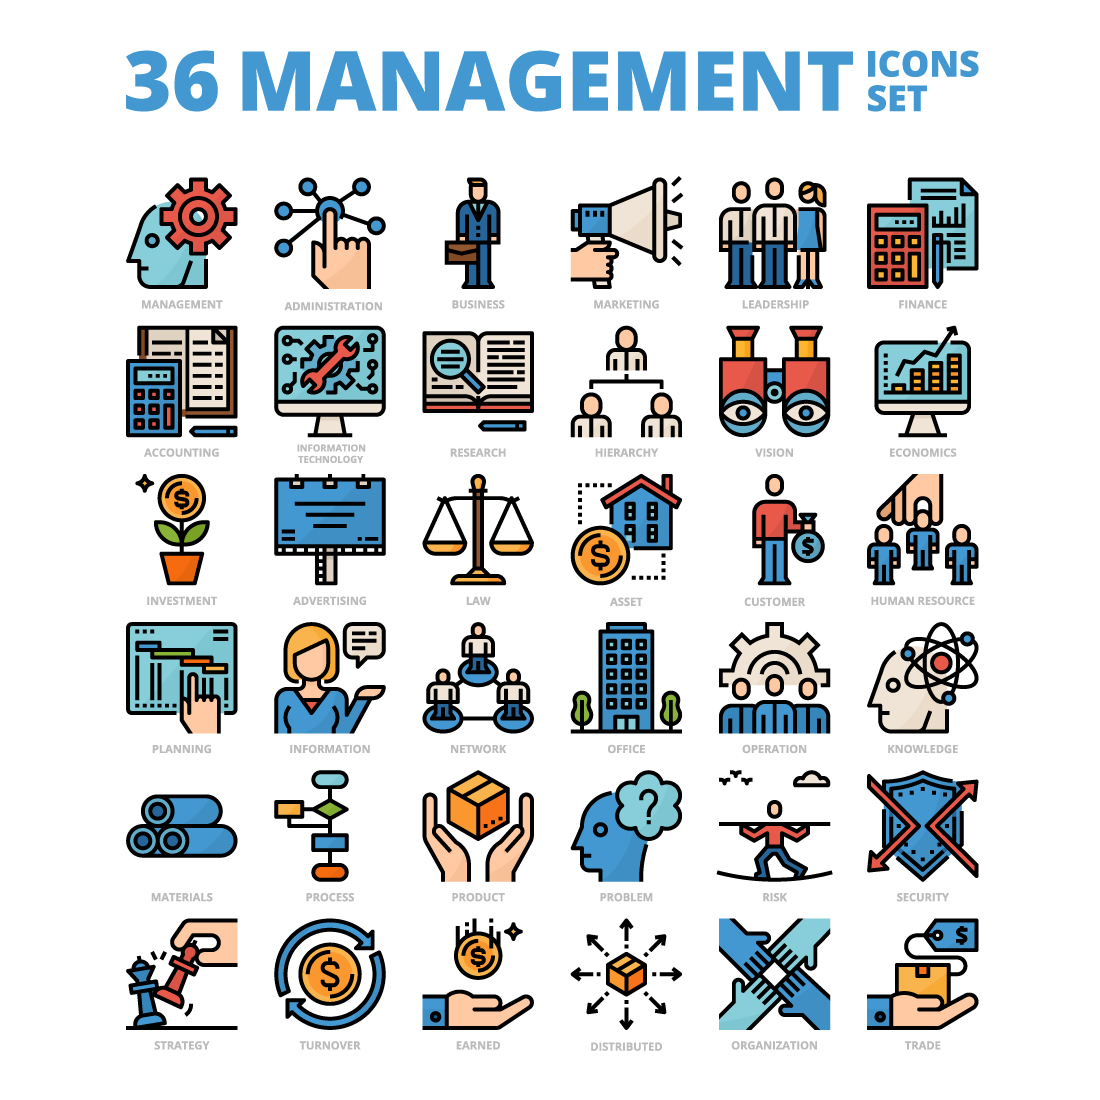 36 Management Icons Set x 4 Styles cover image.